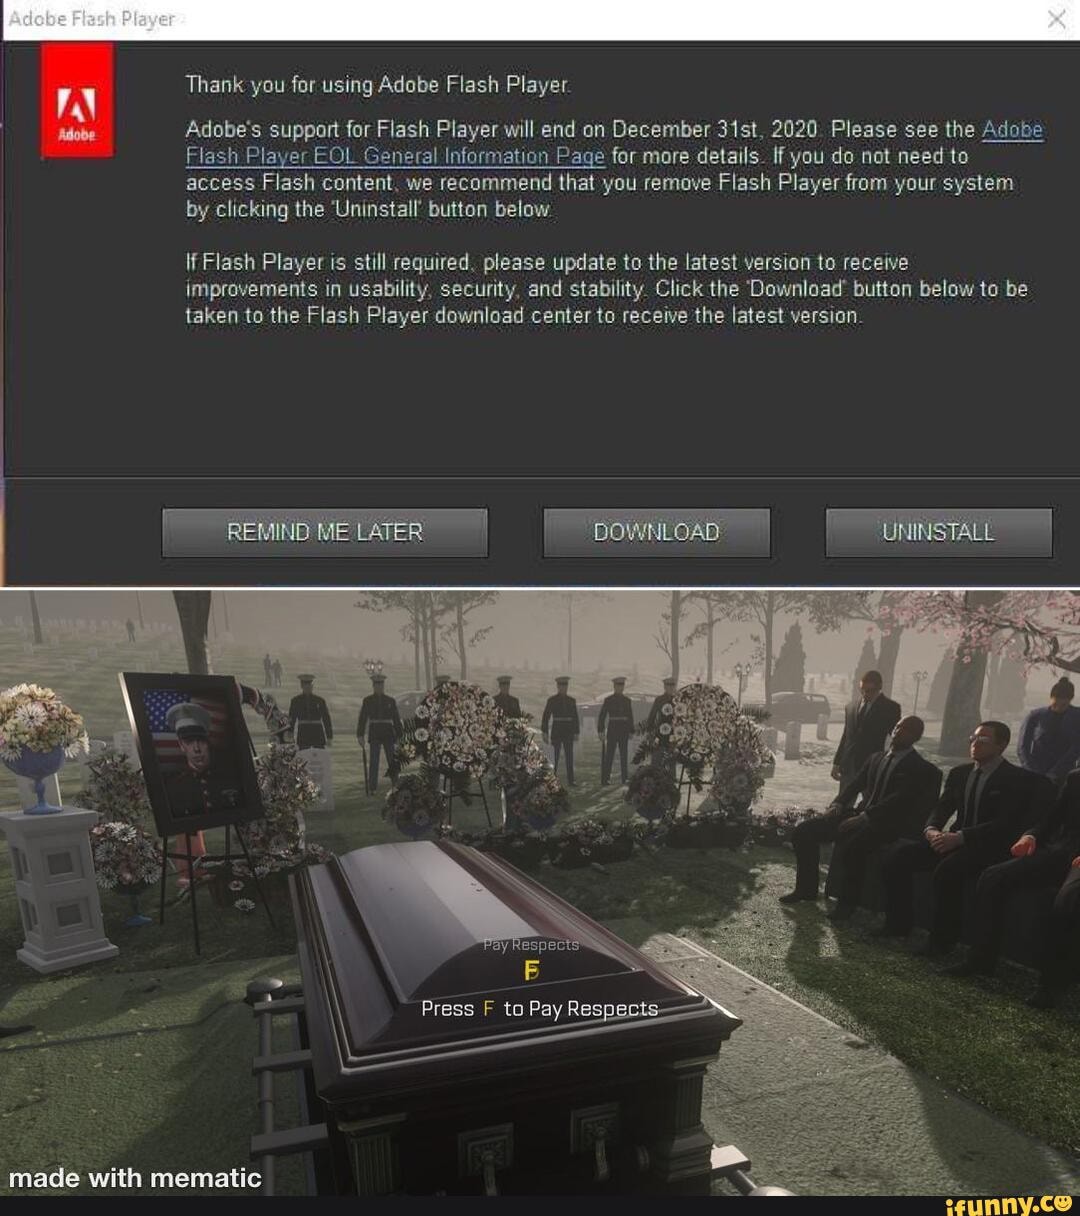 Press F Button - Pay Your Respects Meme